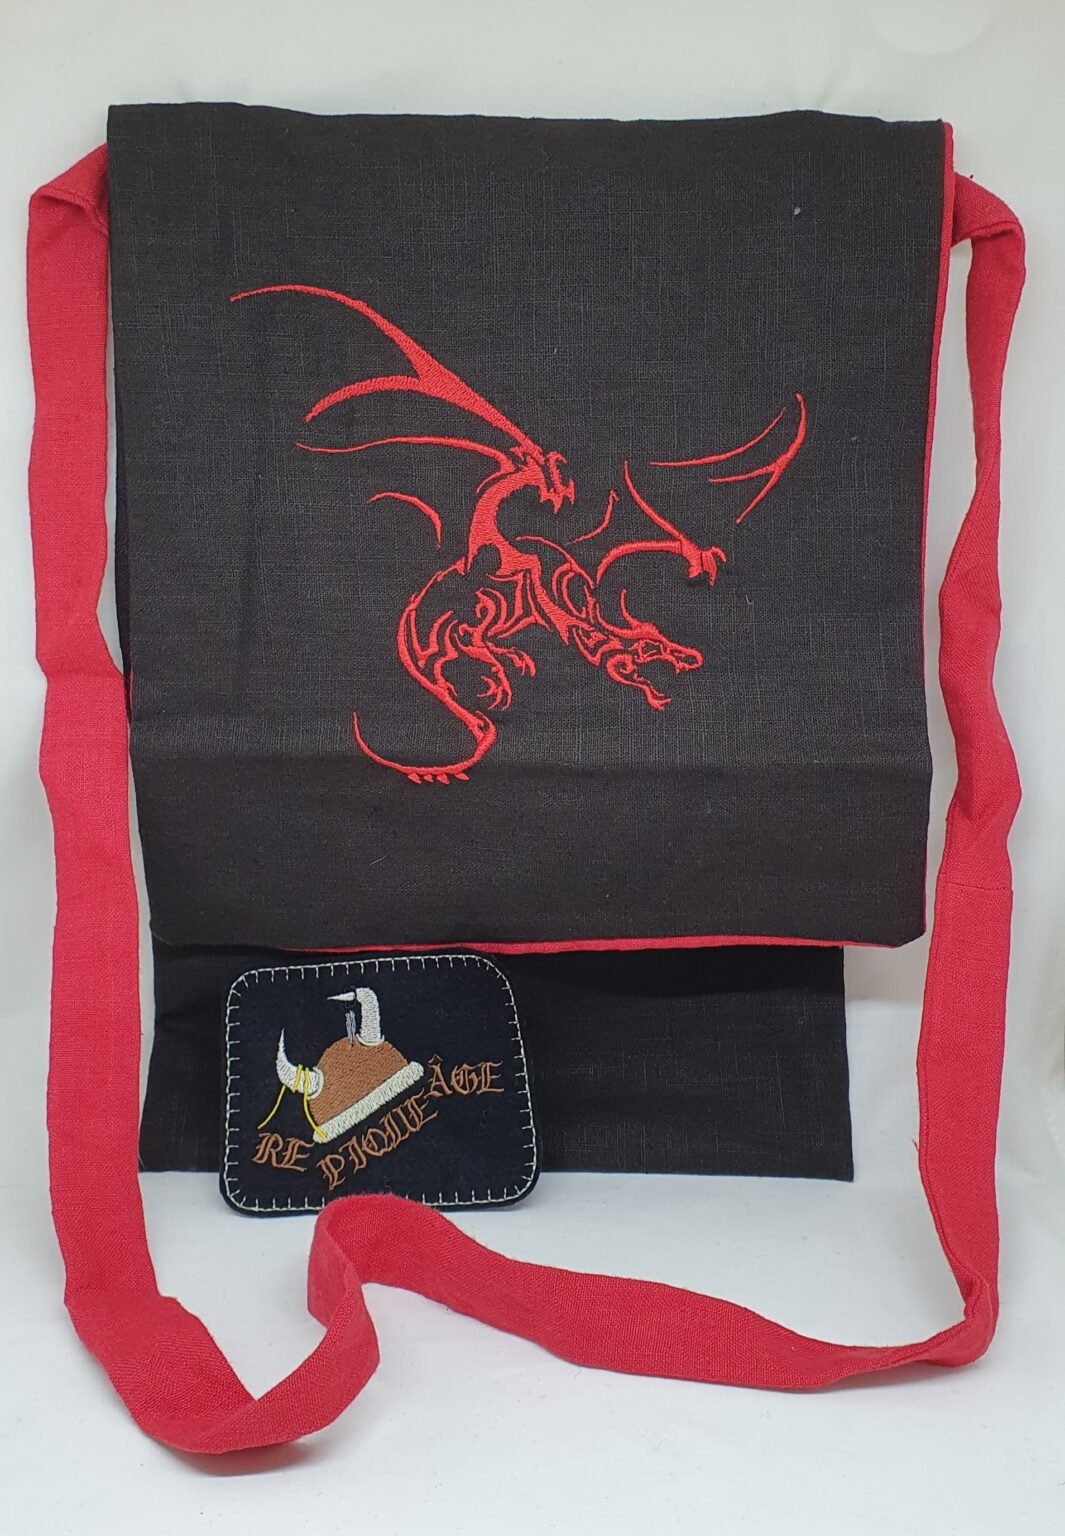 Petite besace lin broderie dragon